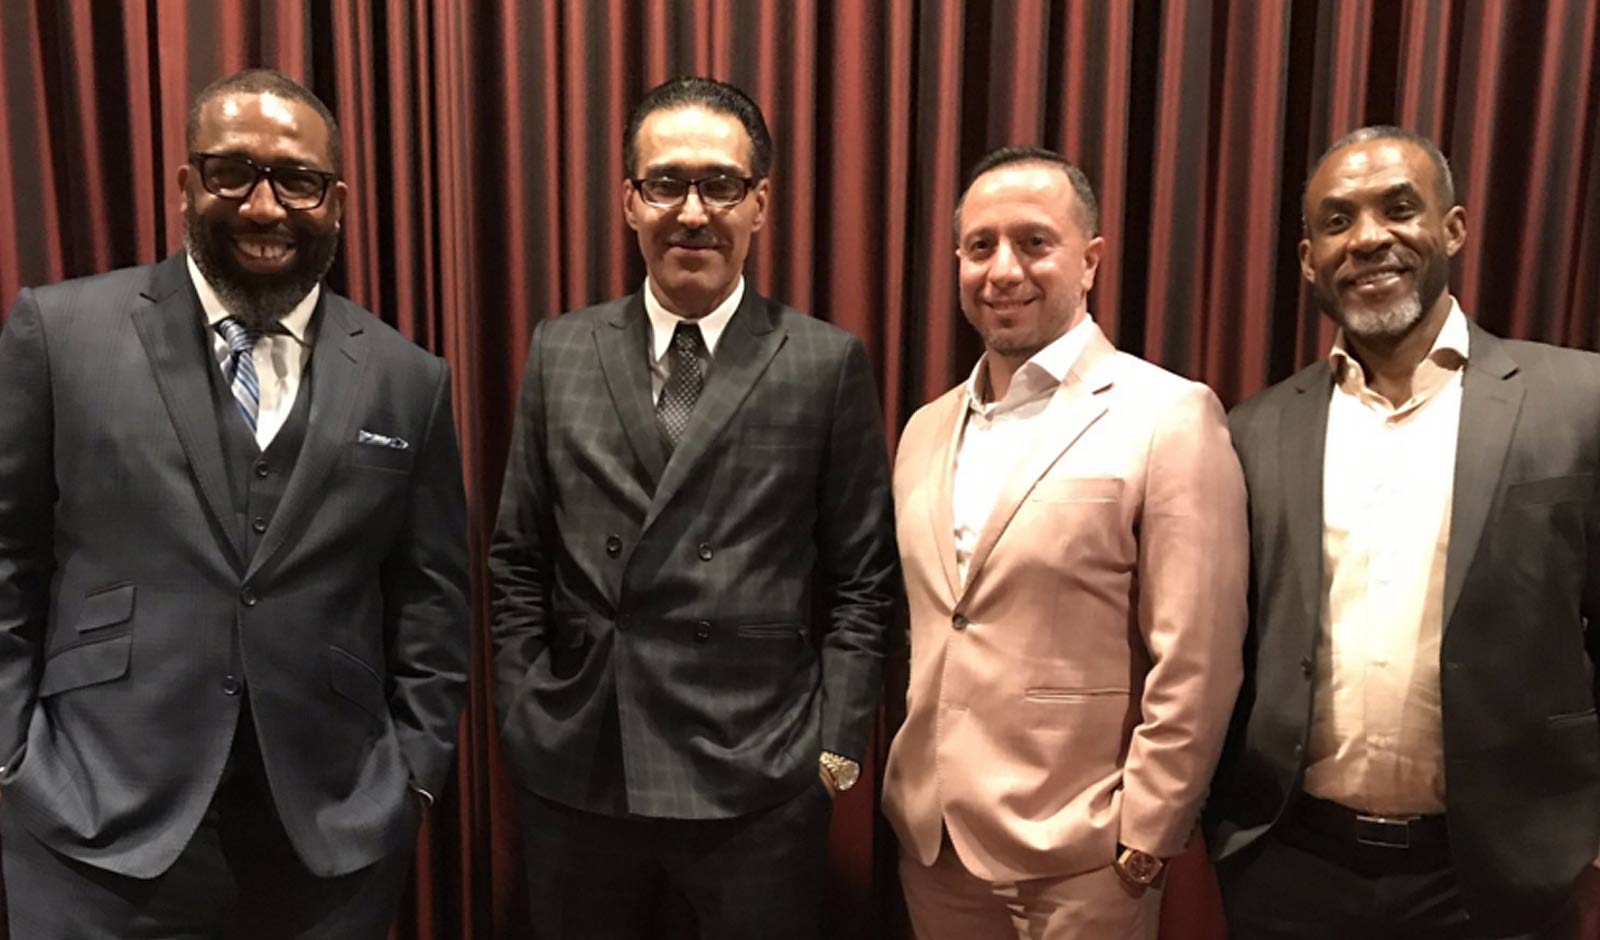 Anthony Wright, Felipe Rodriguez, Johnnie Hincapie, and Everton Wagstaffe in their custom Bindle & Keep suits at the May 2017 Innocence Project gala. 